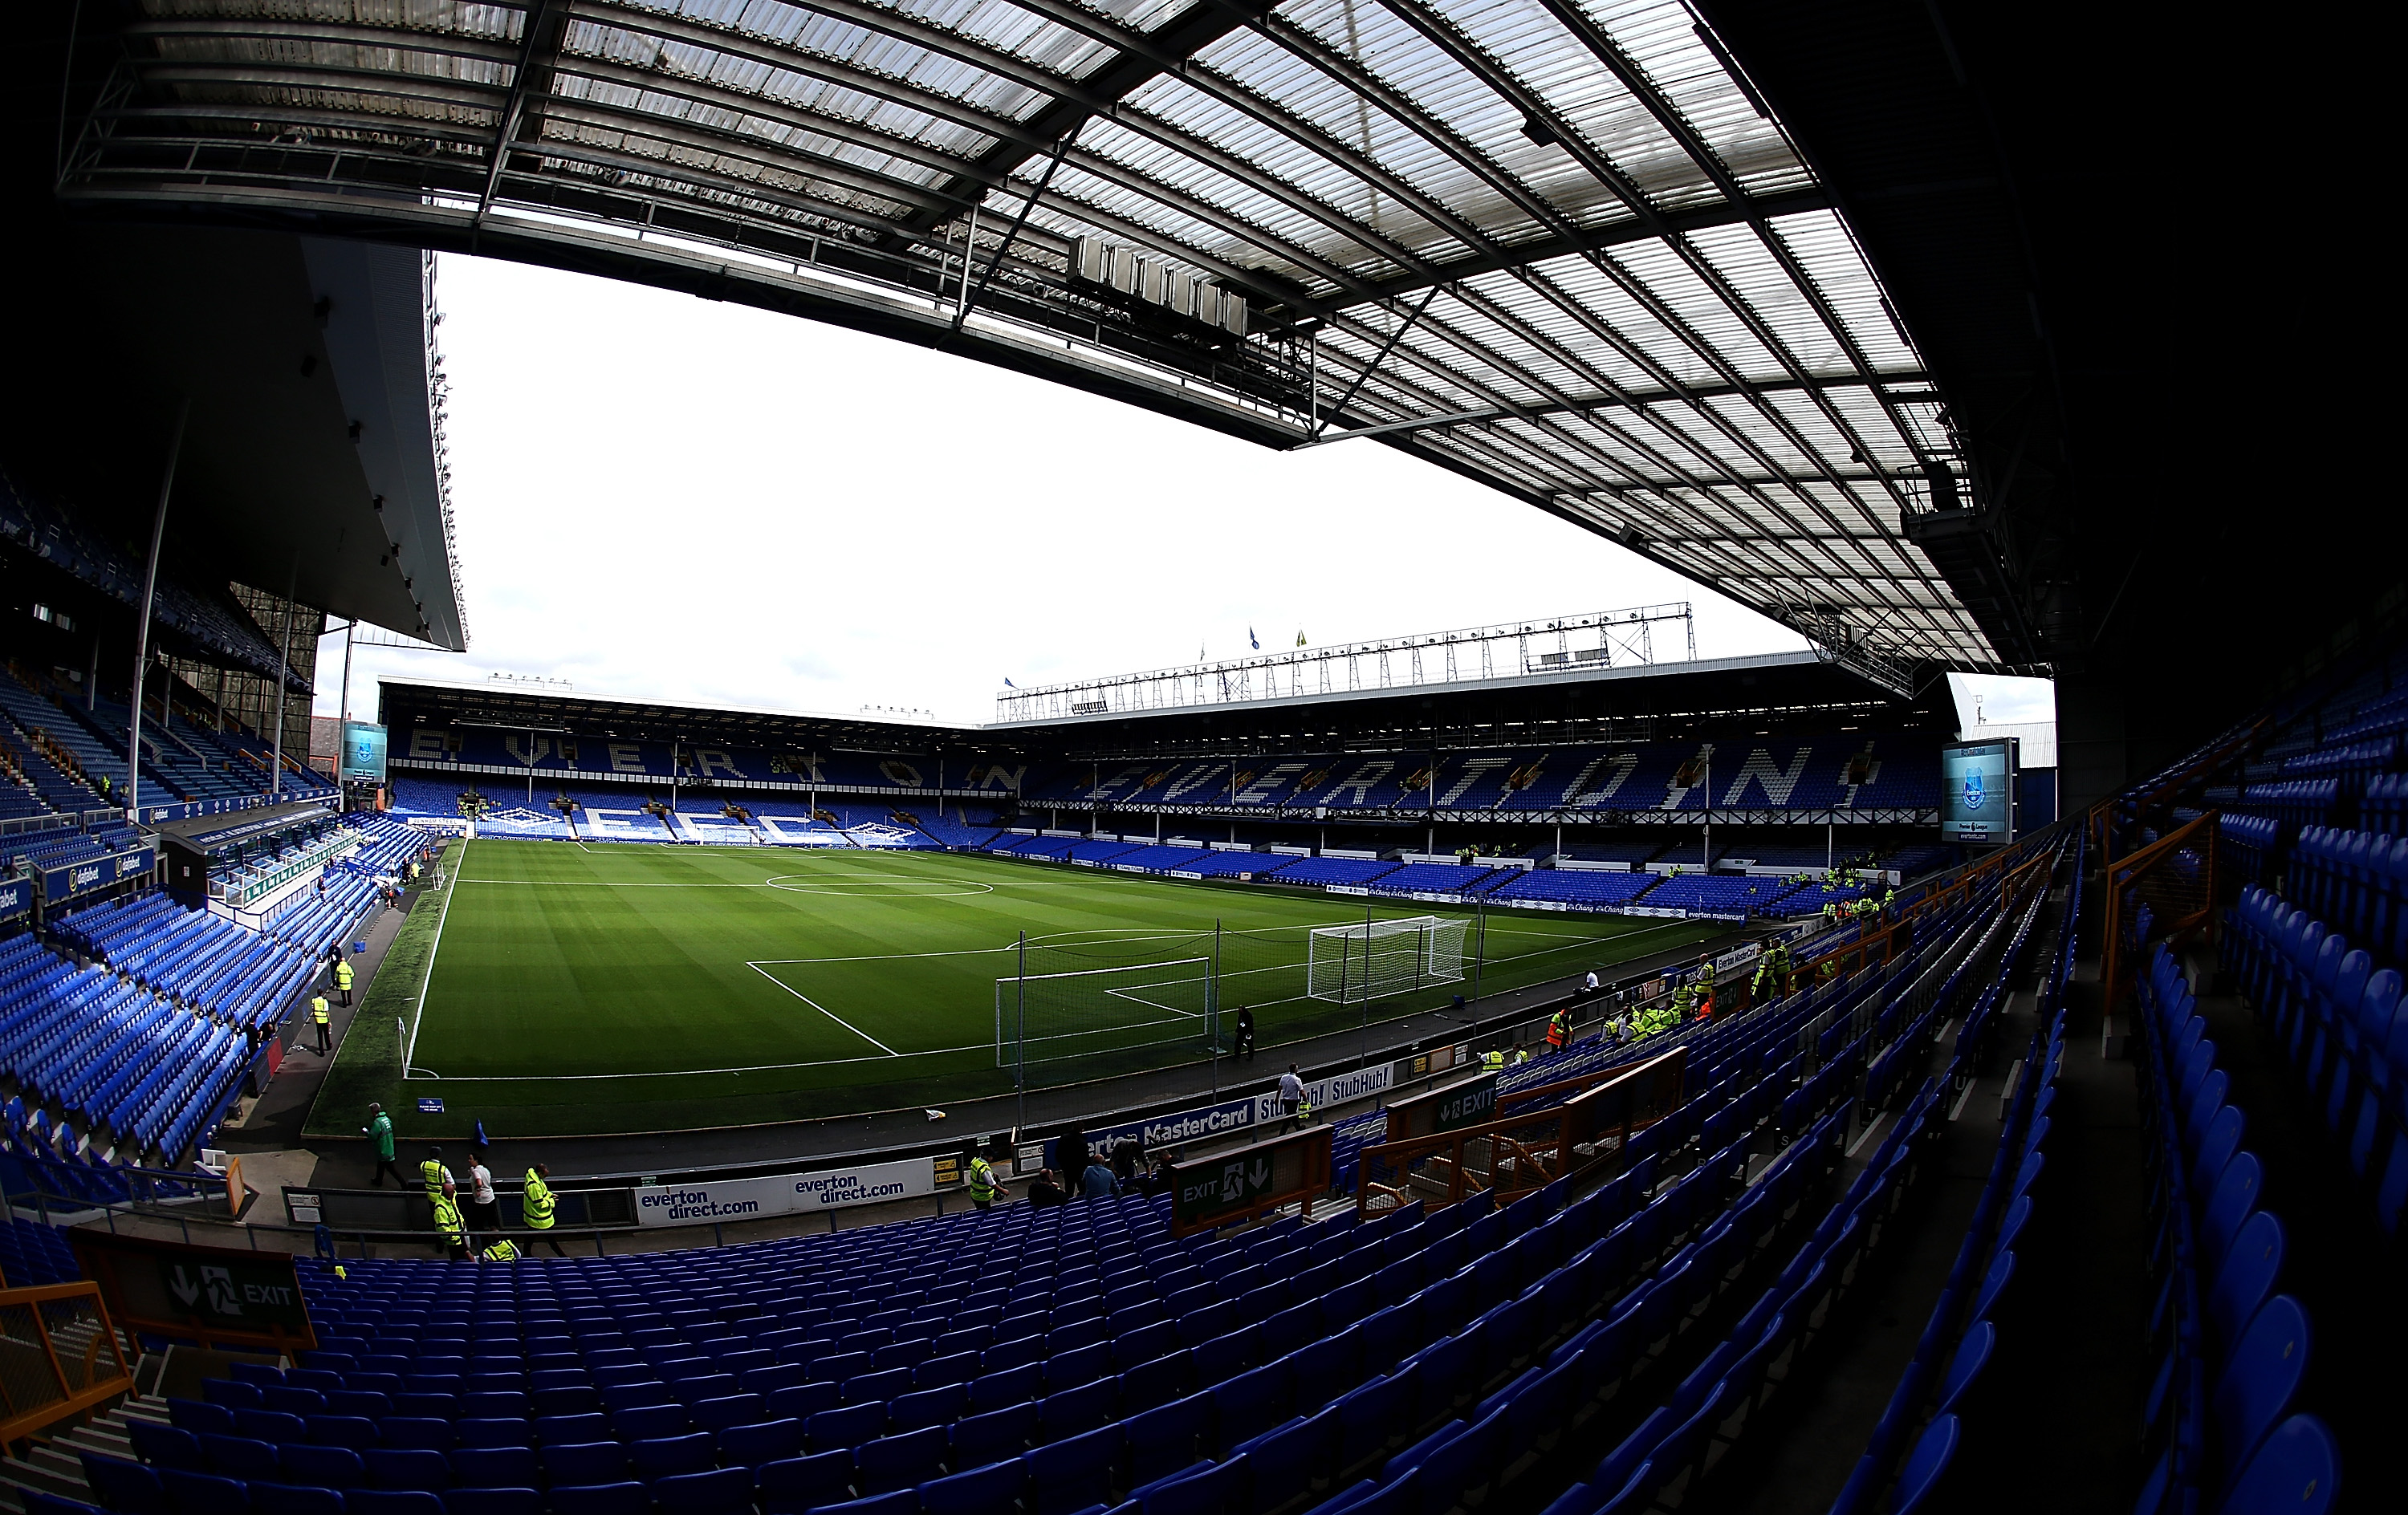 LIVERPOOL, ENGLAND - AUGUST 13:  General view ahead of the Premier League match between Everton and Tottenham Hotspur  at Goodison Park on August 13, 2016 in Liverpool, England.  (Photo by Jan Kruger/Getty Images)